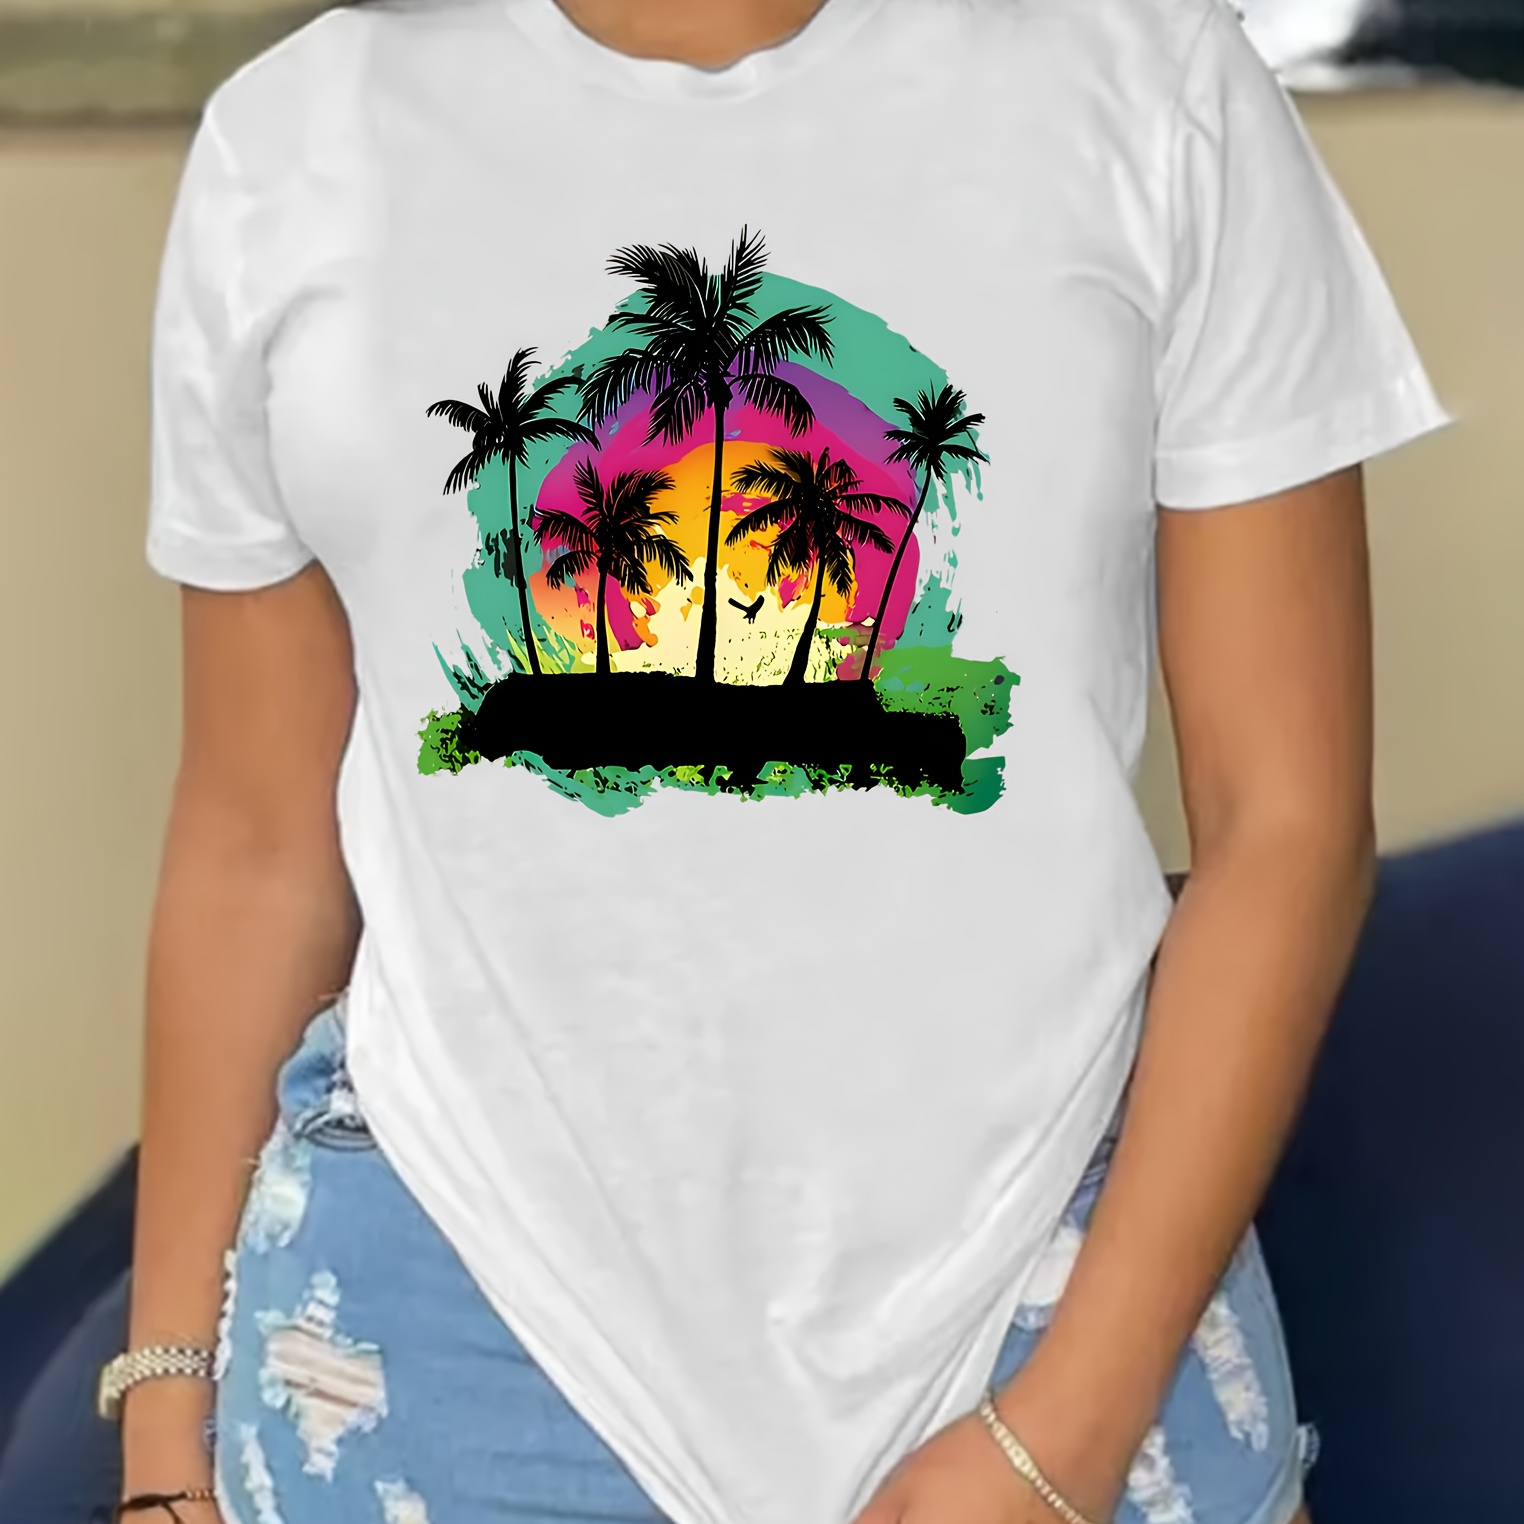 

Sunset & Coconut Tree Print T-shirt, Short Sleeve Crew Neck Casual Top For Summer & Spring, Women's Clothing